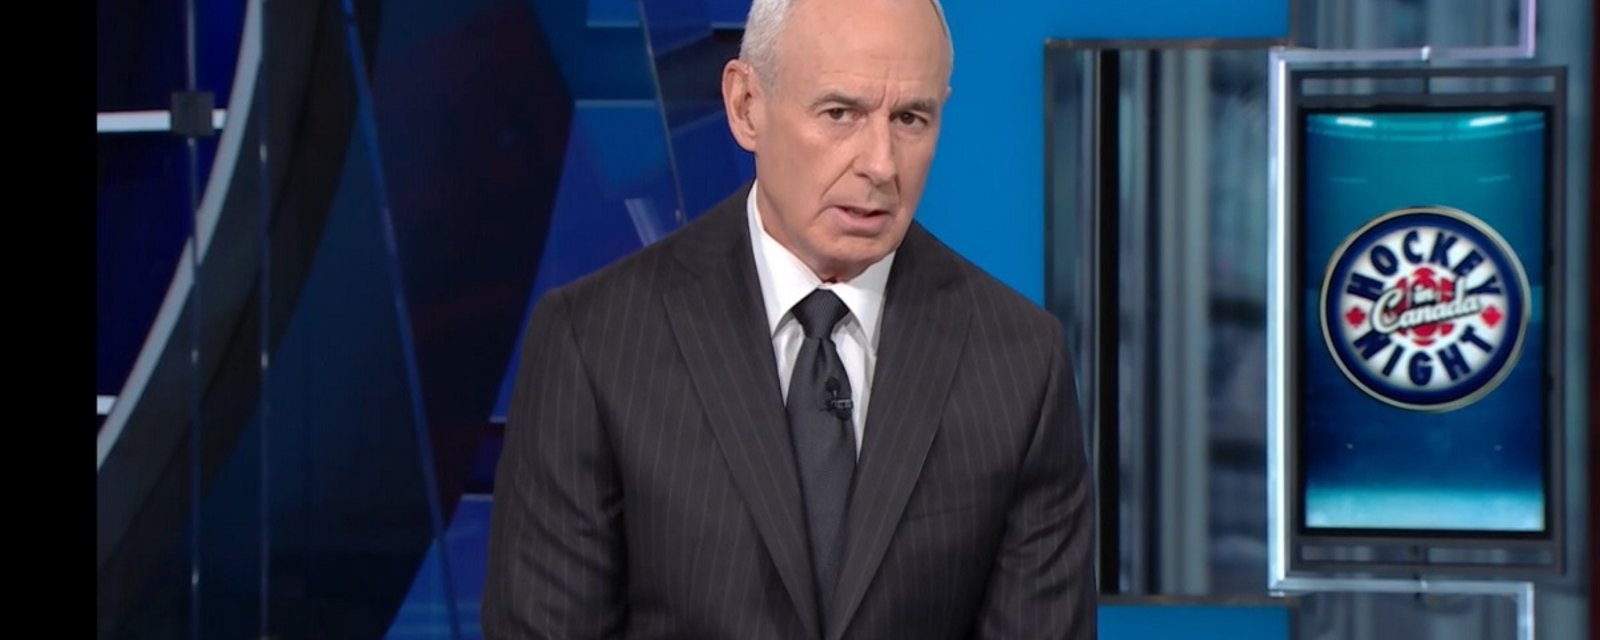 Ron MacLean appears to throw another co-host under the bus.